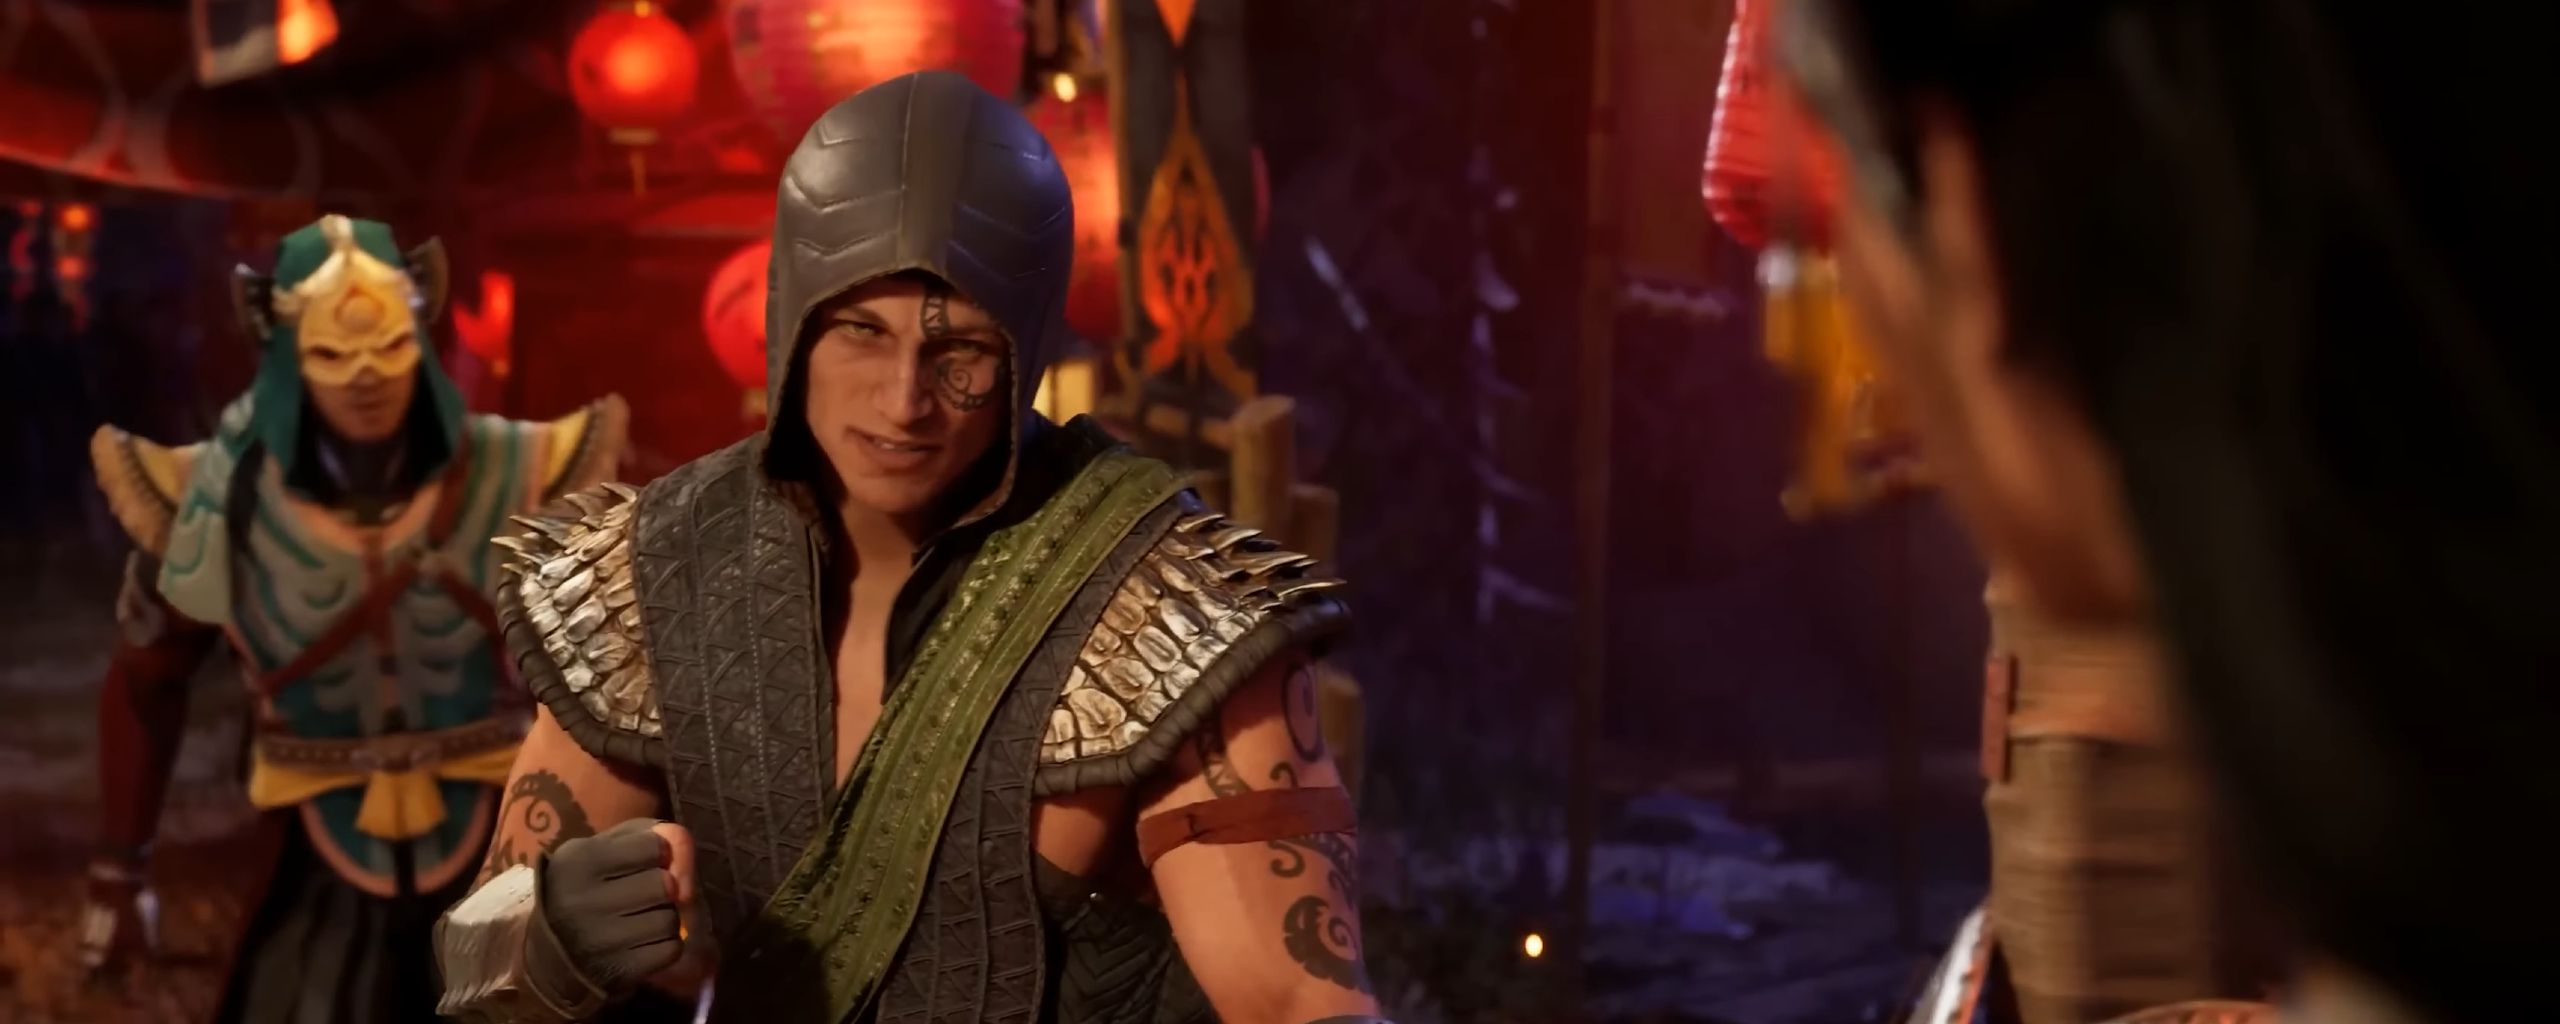 Mortal Kombat 1's Reptile is ready to fight against a character that is off-screen.